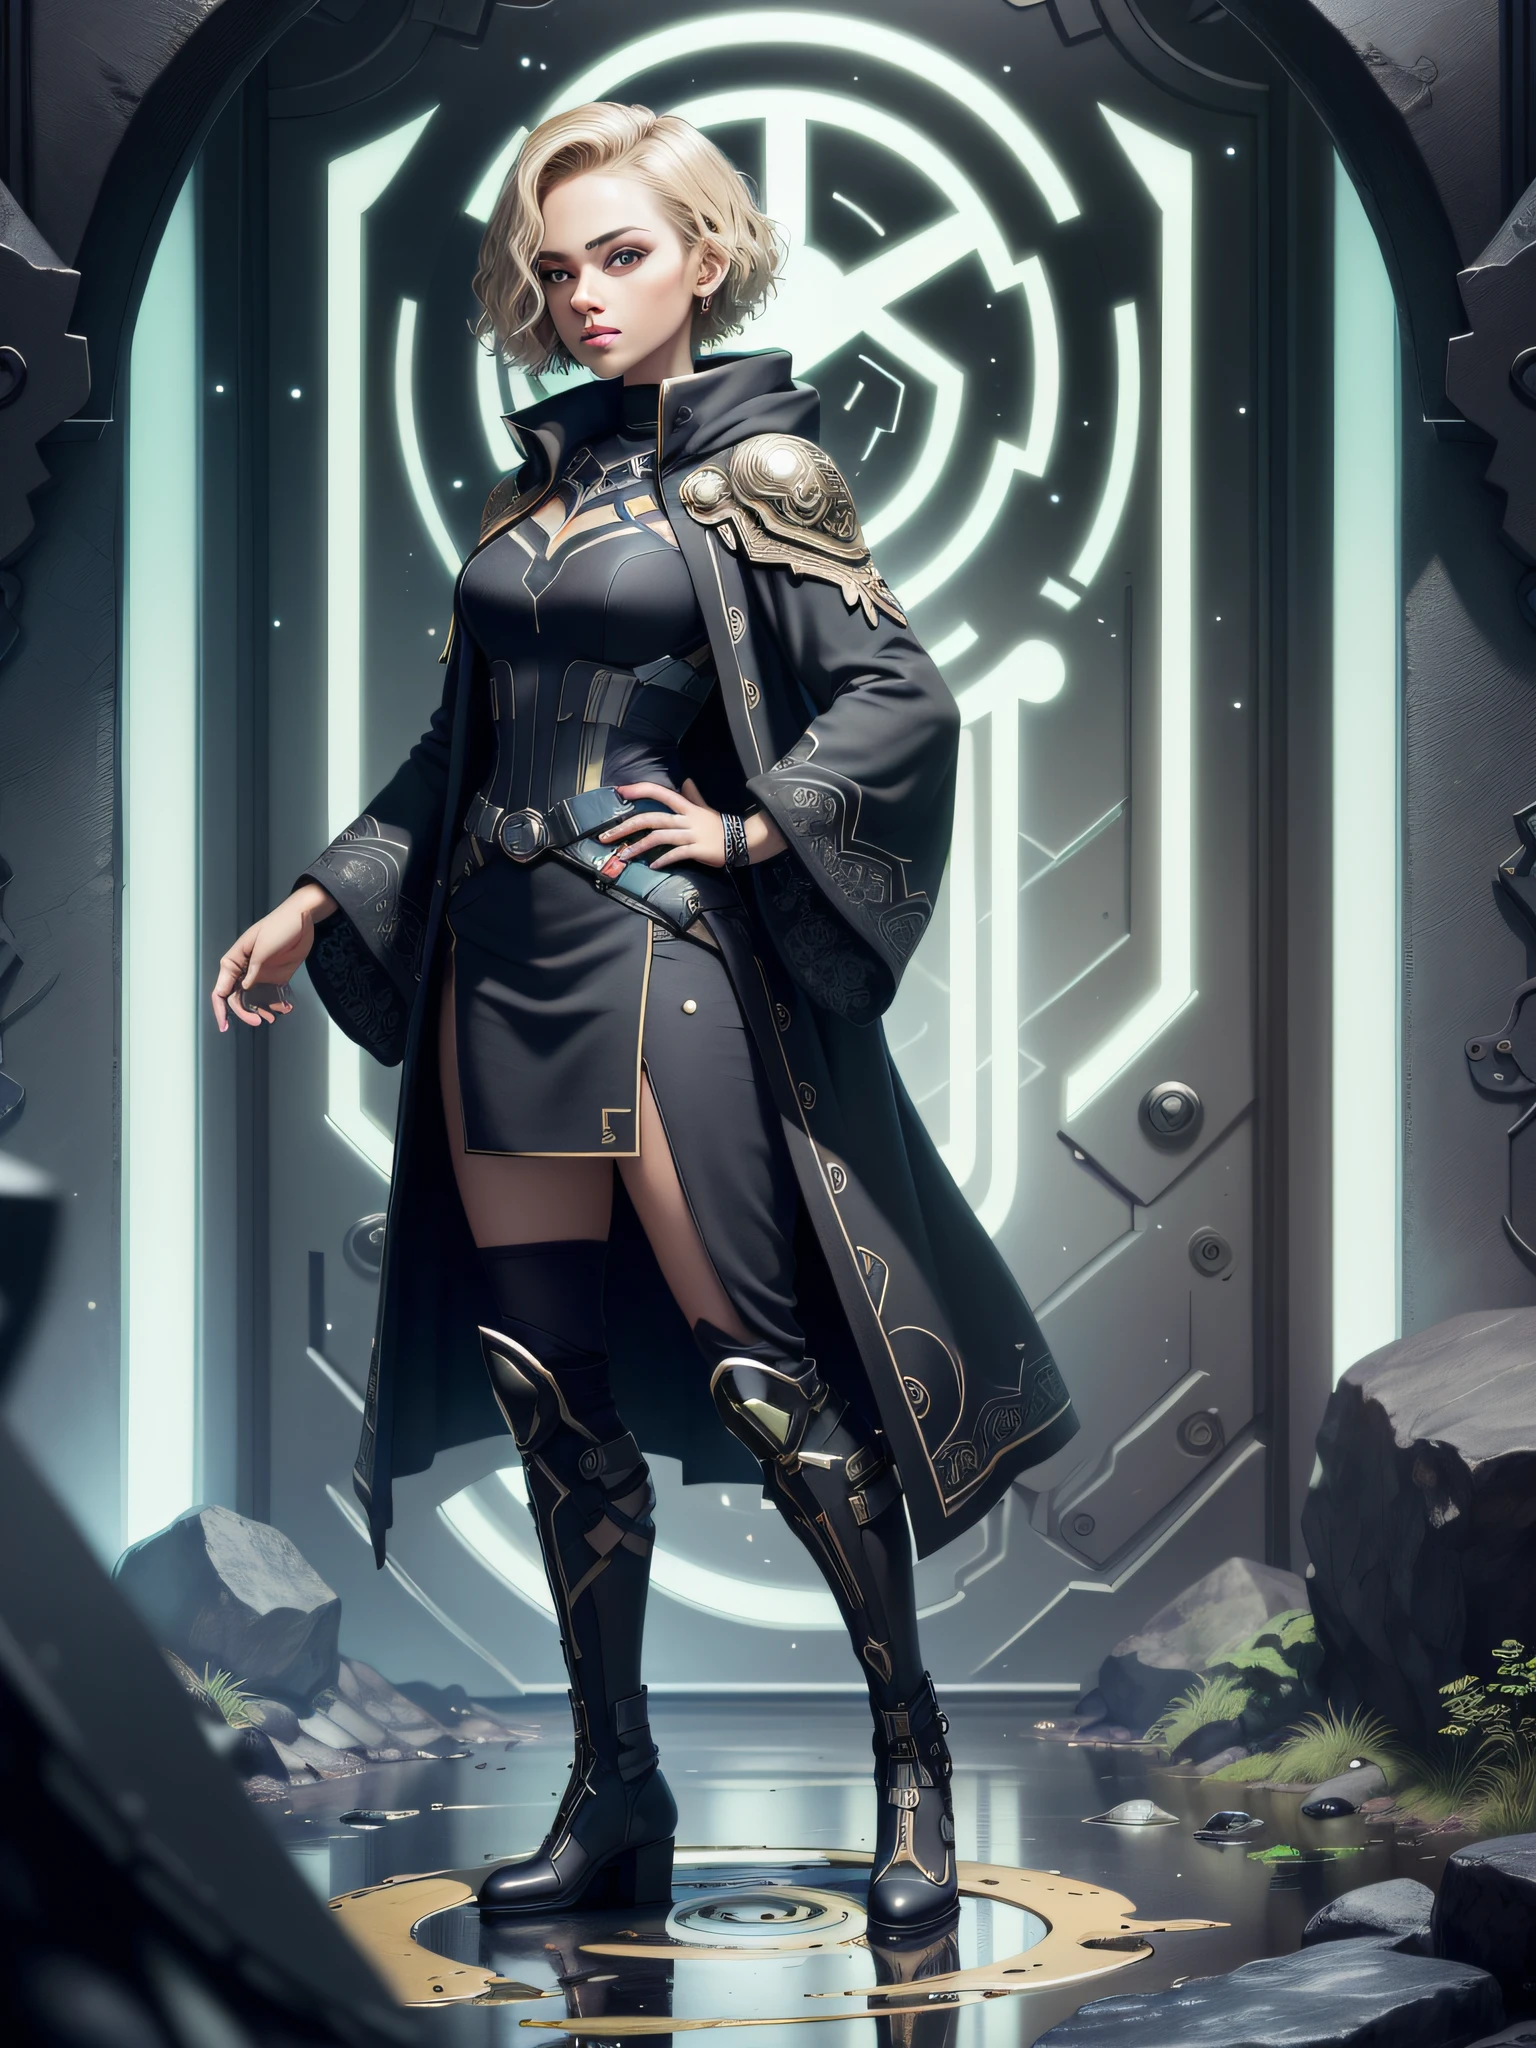 (((extremely detailed face))),(((extremely detailed eyes and face))),((Best quality)), ((masterpiece)),(detailed: 1.4), 3D, ((standing and front)),((night)),((1girl)) beautiful woman, blonde, short hair, green eyes, black panther cover, black jacket, wizard robes, black and green boots, detail in the big magic book in the background of the image, magic detail, more detail on the black cover,  More details on your fingers